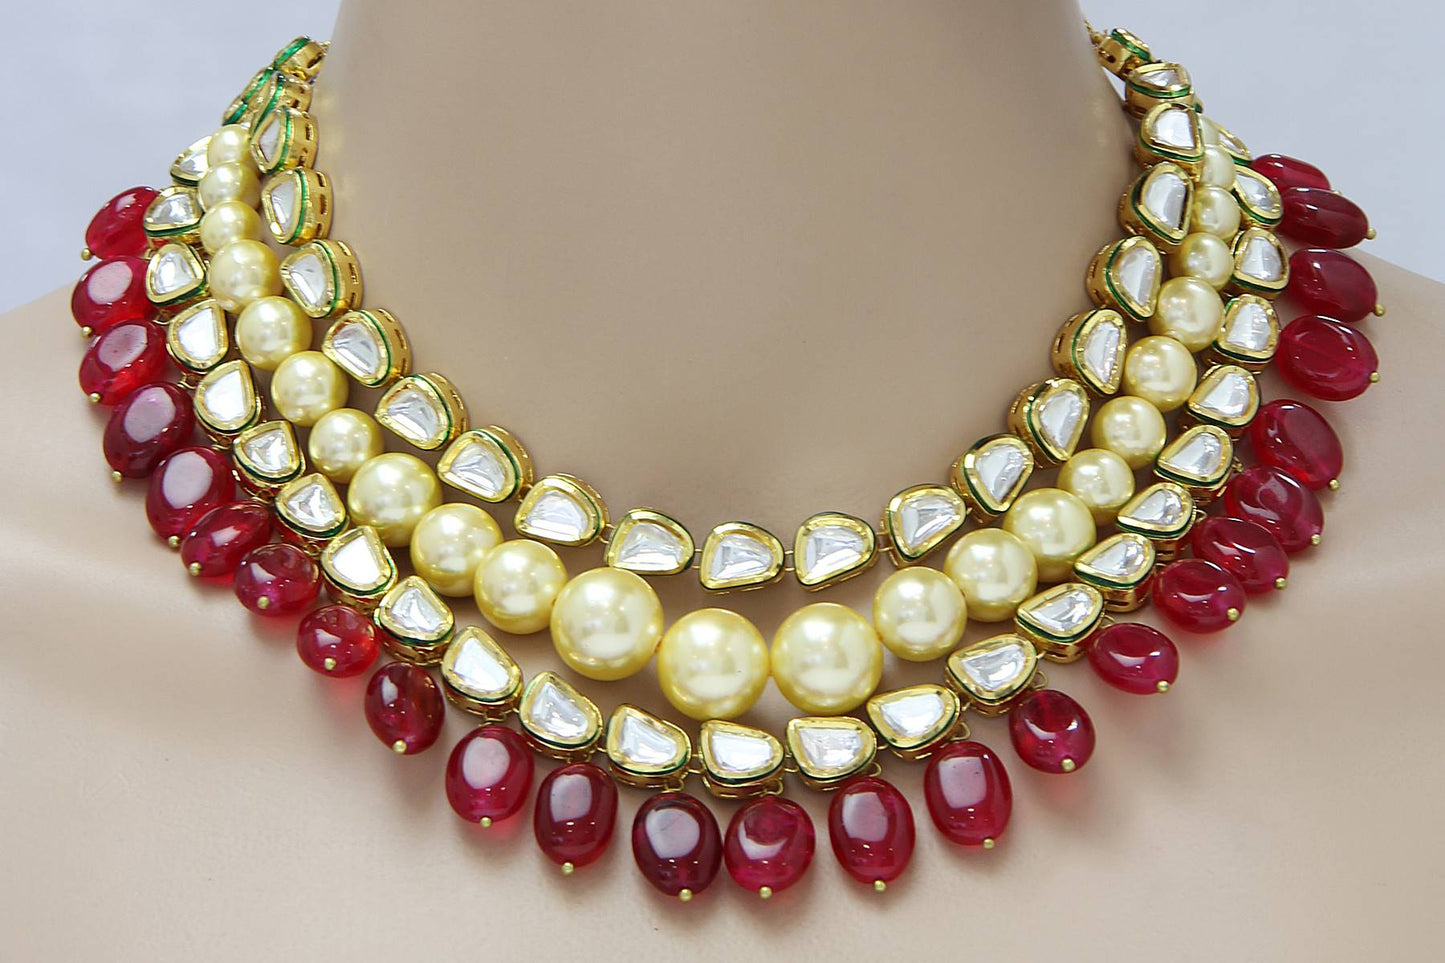 Layered Uncut Kundan Pearls Ruby Red Necklace - Rent Jewels